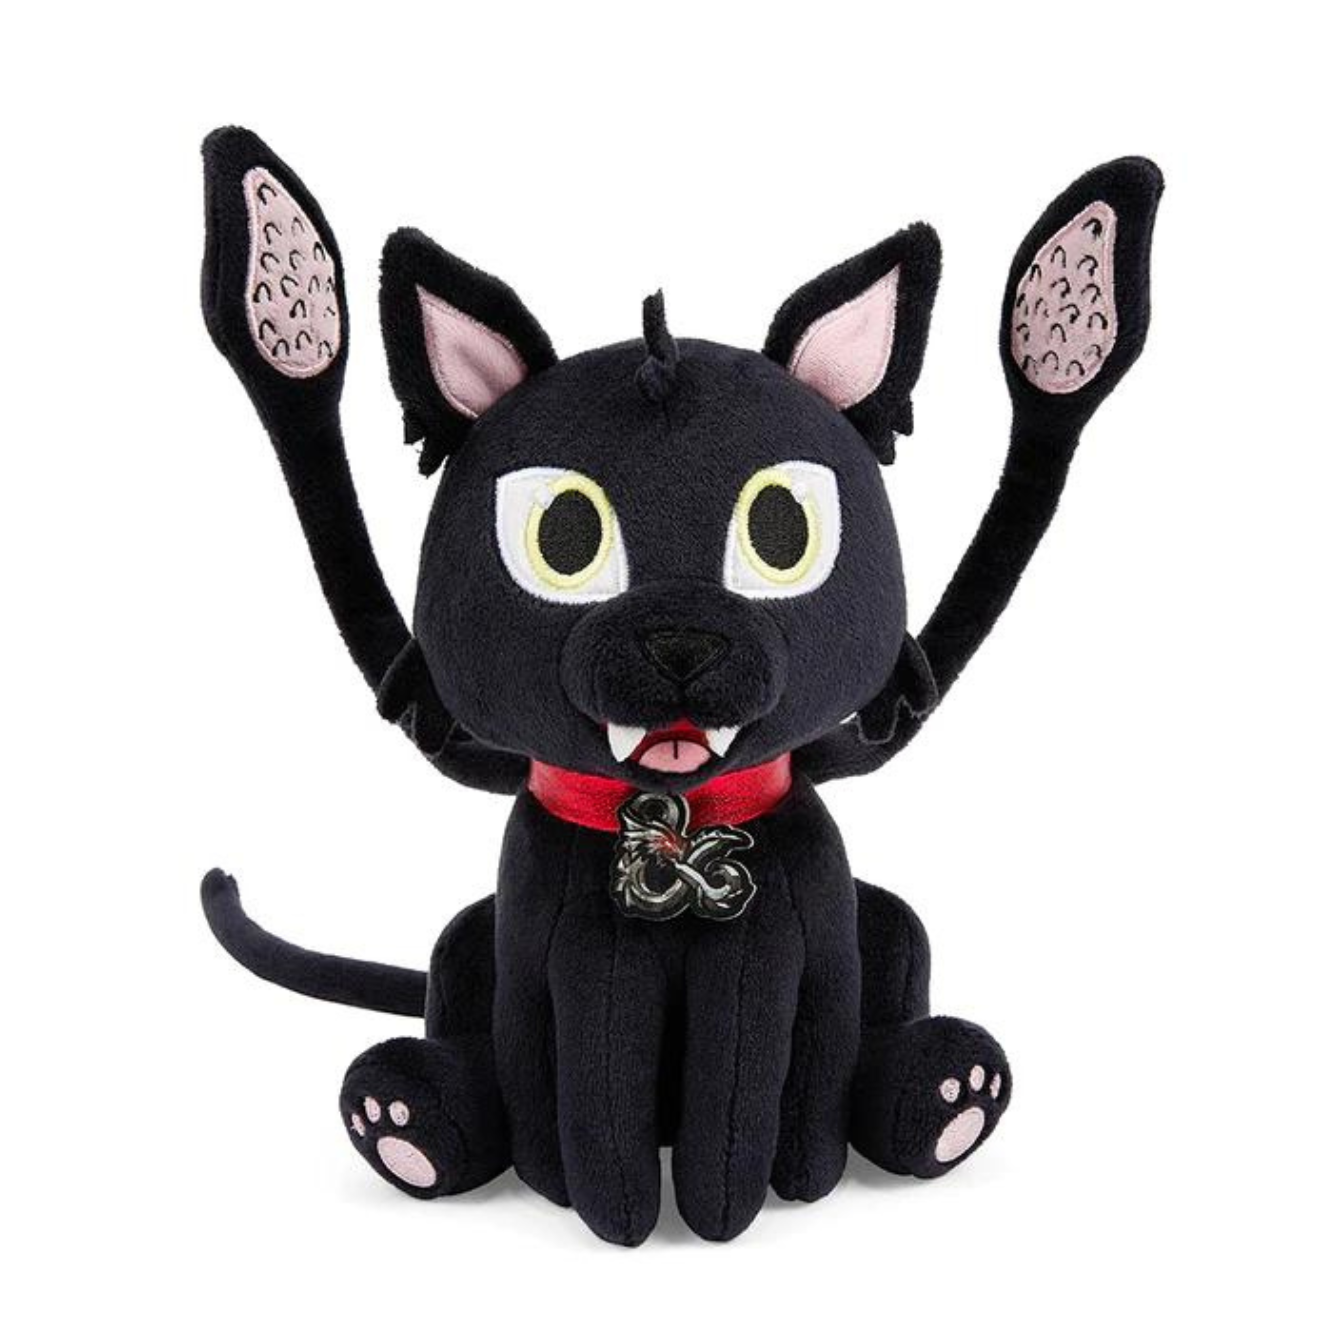 DUNGEONS & DRAGONS®: HONOR AMONG THIEVES - DISPLACER BEAST 7" PHUNNY PLUSH